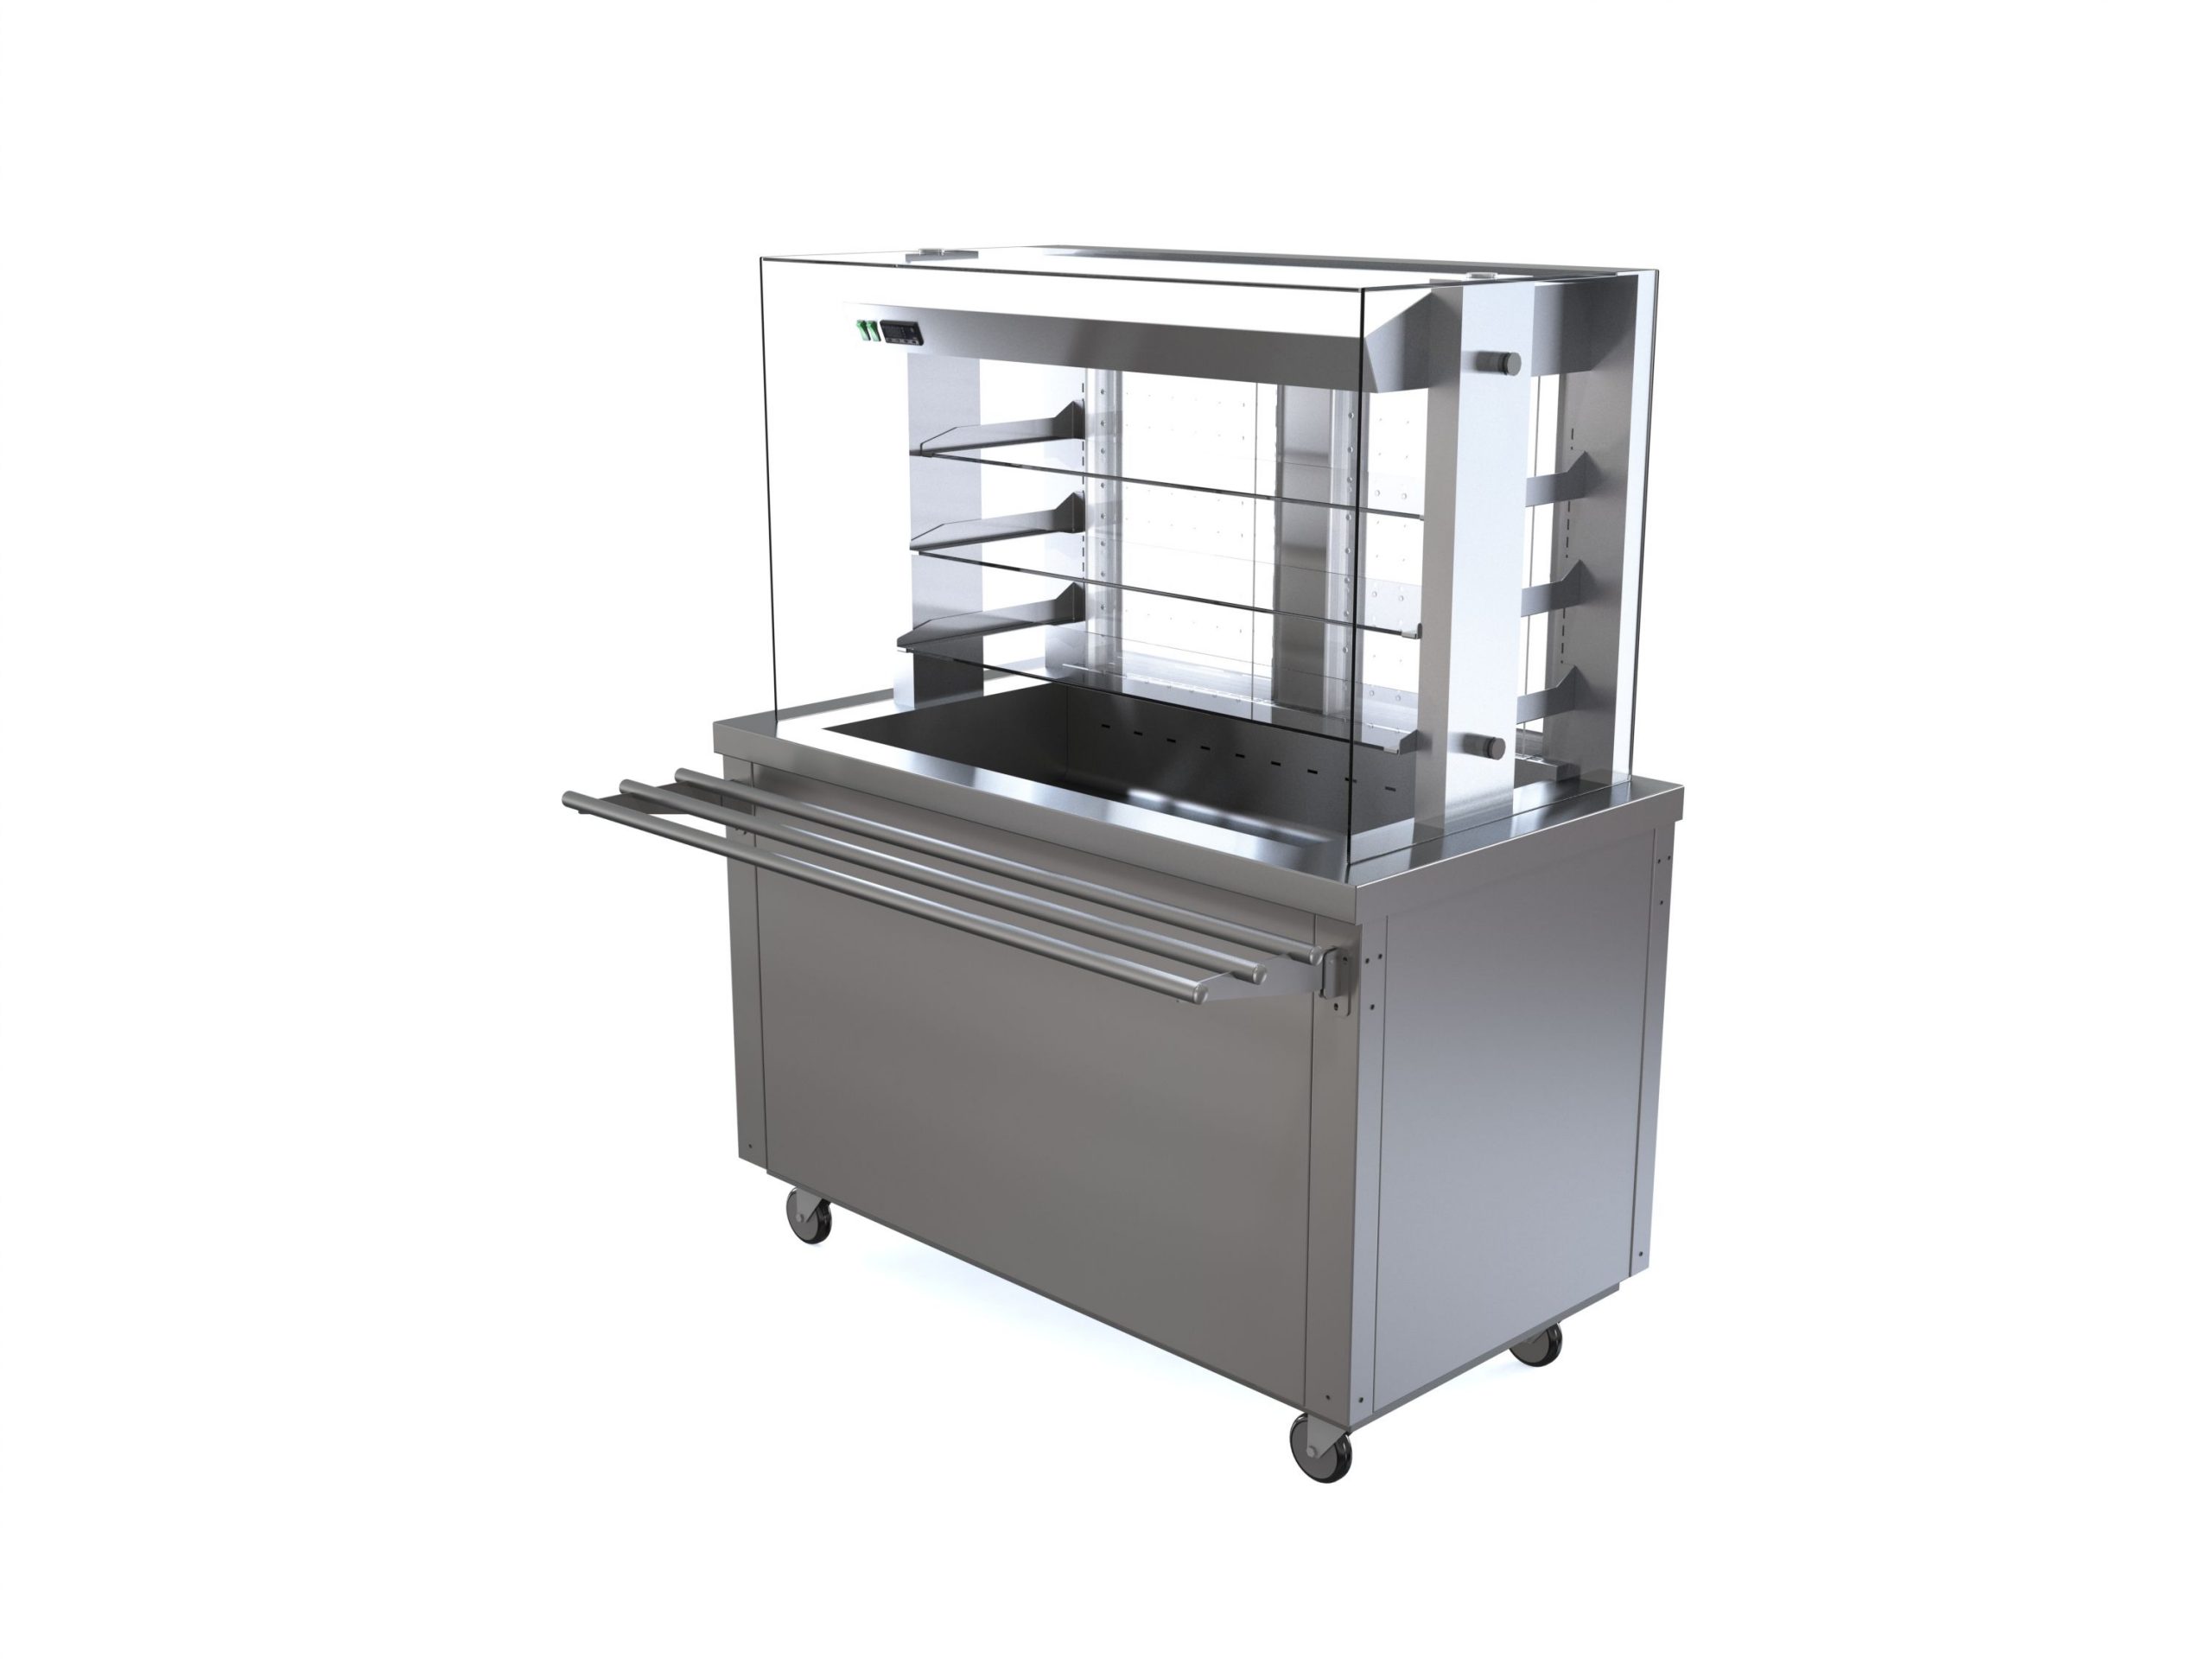 Parry FS-RMT3 - Flexi Serve Refrigerated Multi-Tier Display